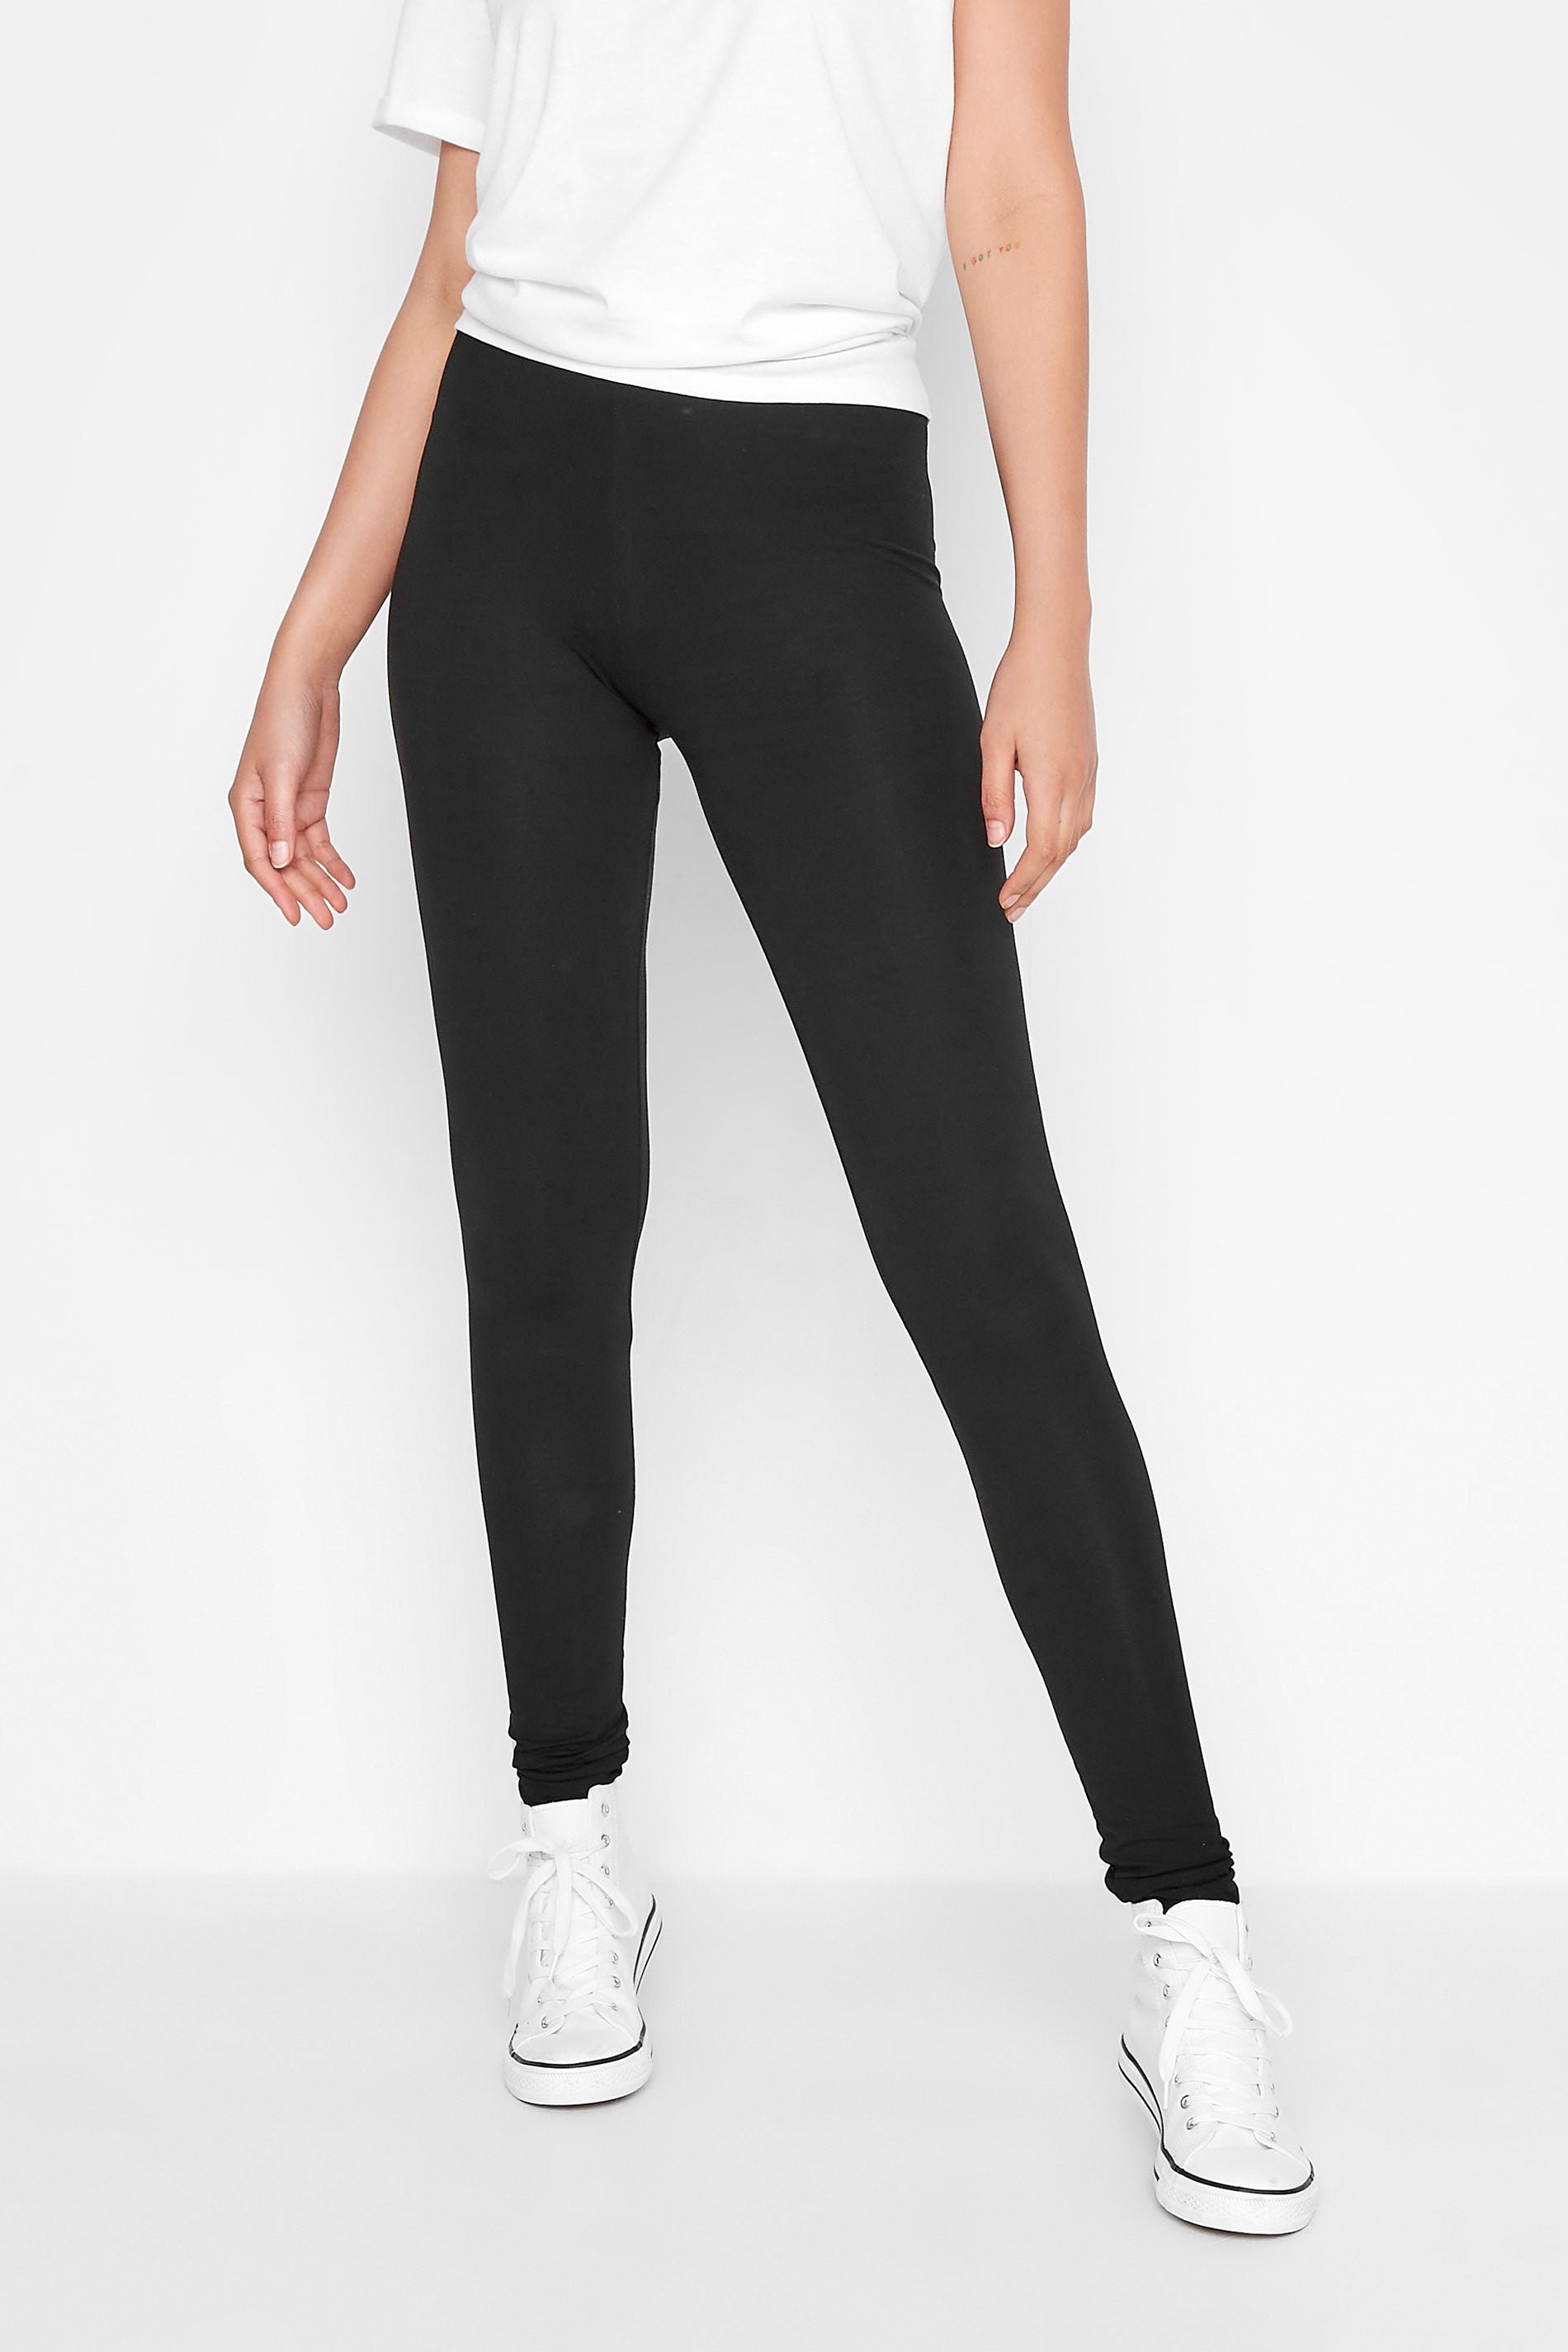 LTS MADE FOR GOOD Tall Black Stretch Cotton Leggings – Search By